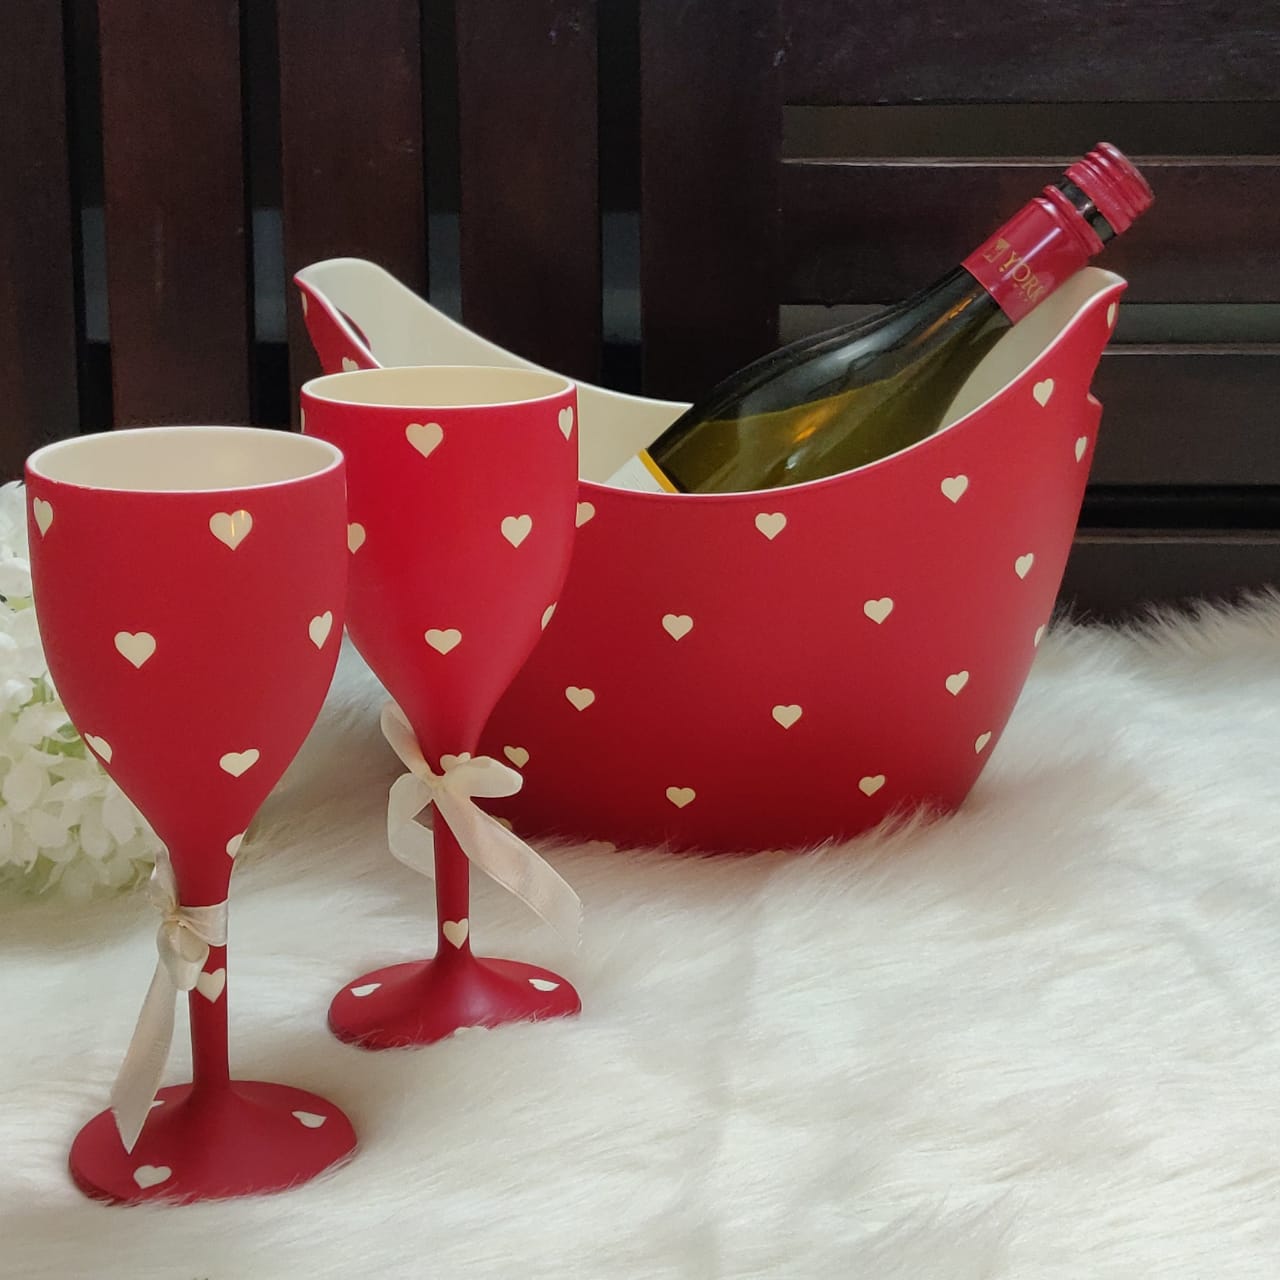 Non breakable red wine glass gift set (Set of 2 - 290 ml each) with chilling bucket - Valentines Day gifts ,Wedding & Anniversary gifts